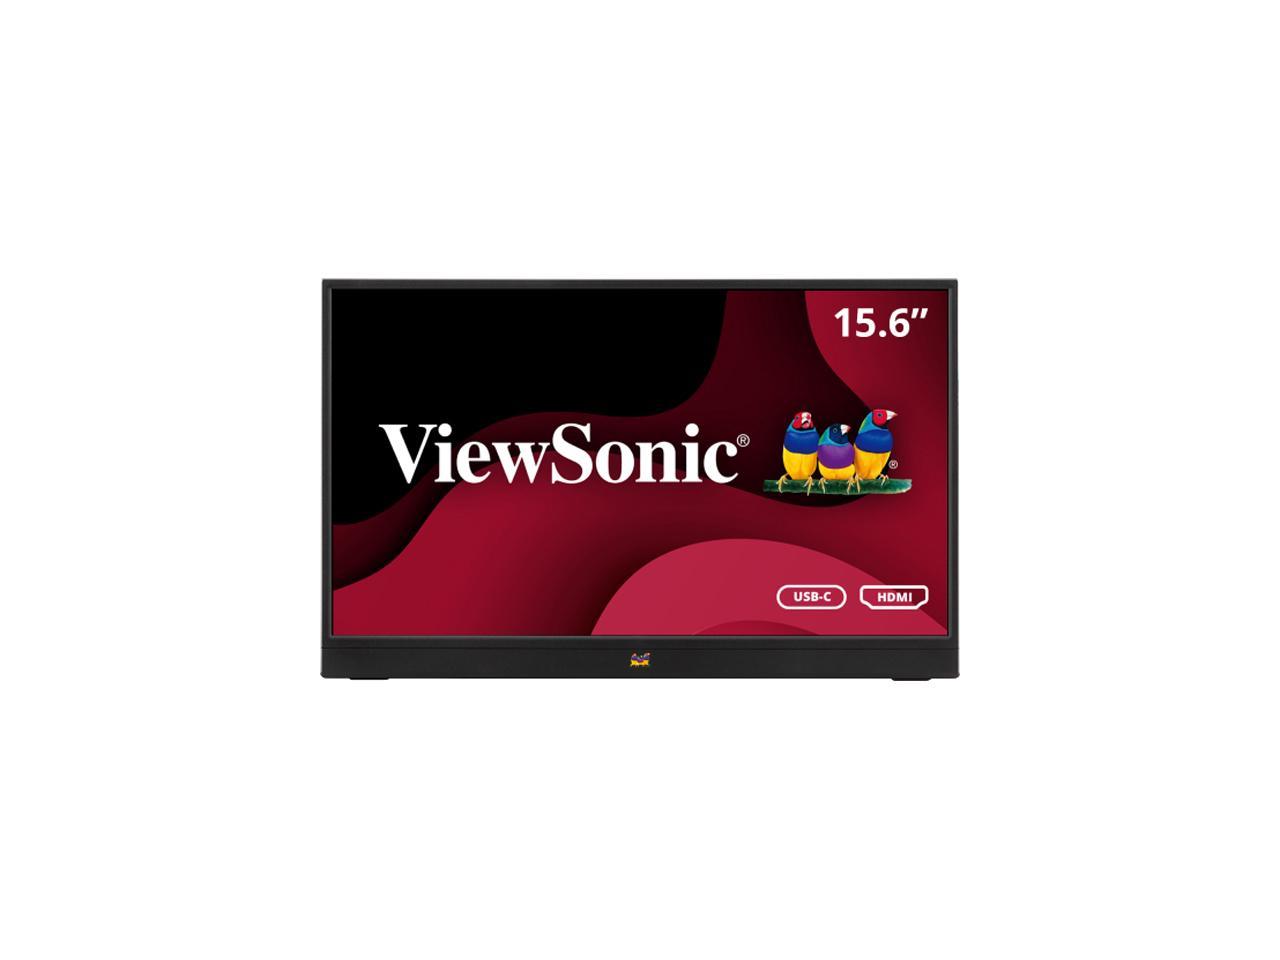 ViewSonic VA1655 15.6 Inch 1080p Portable IPS Monitor with Mobile Ergonomics, USB-C, and HDMI for Home and Office